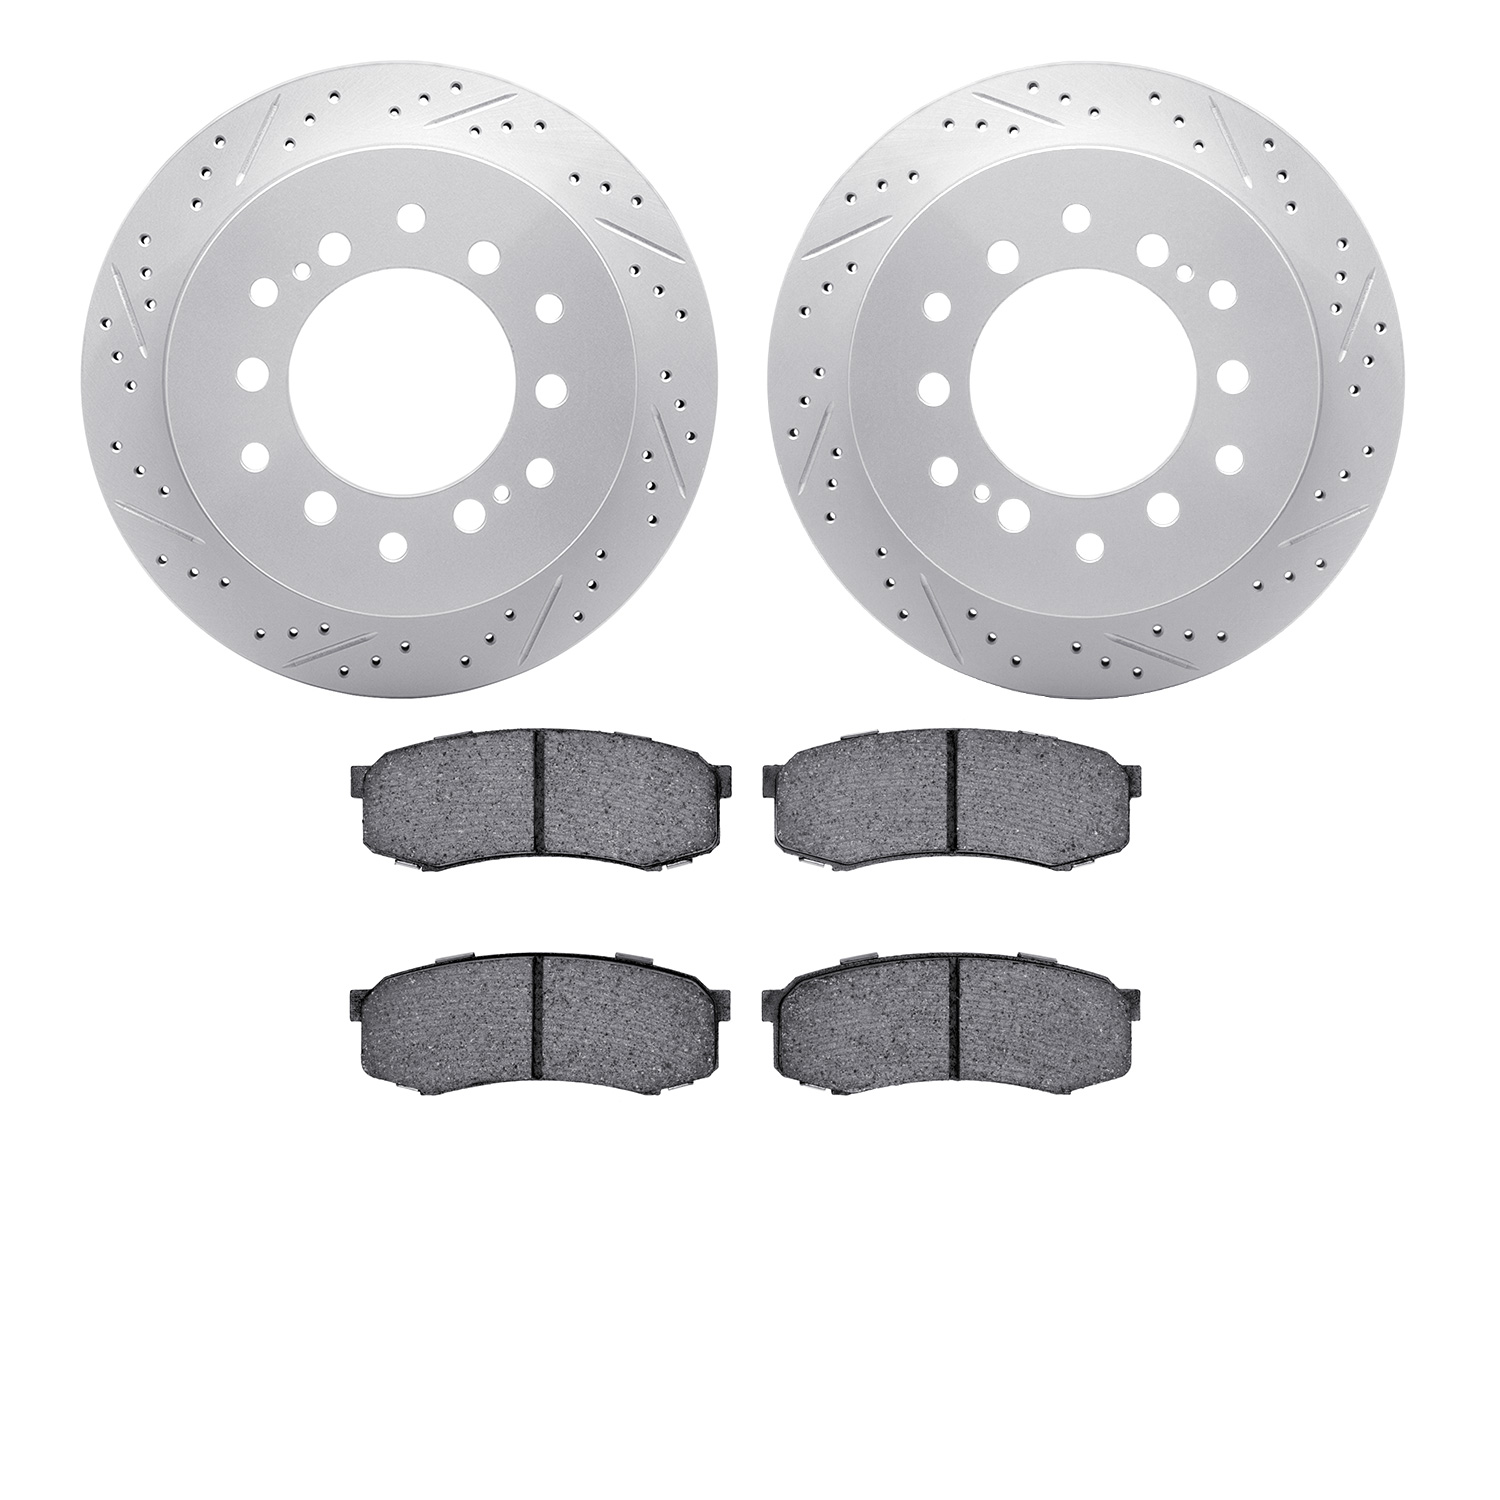 2502-76099 Geoperformance Drilled/Slotted Rotors w/5000 Advanced Brake Pads Kit, 2001-2009 Lexus/Toyota/Scion, Position: Rear